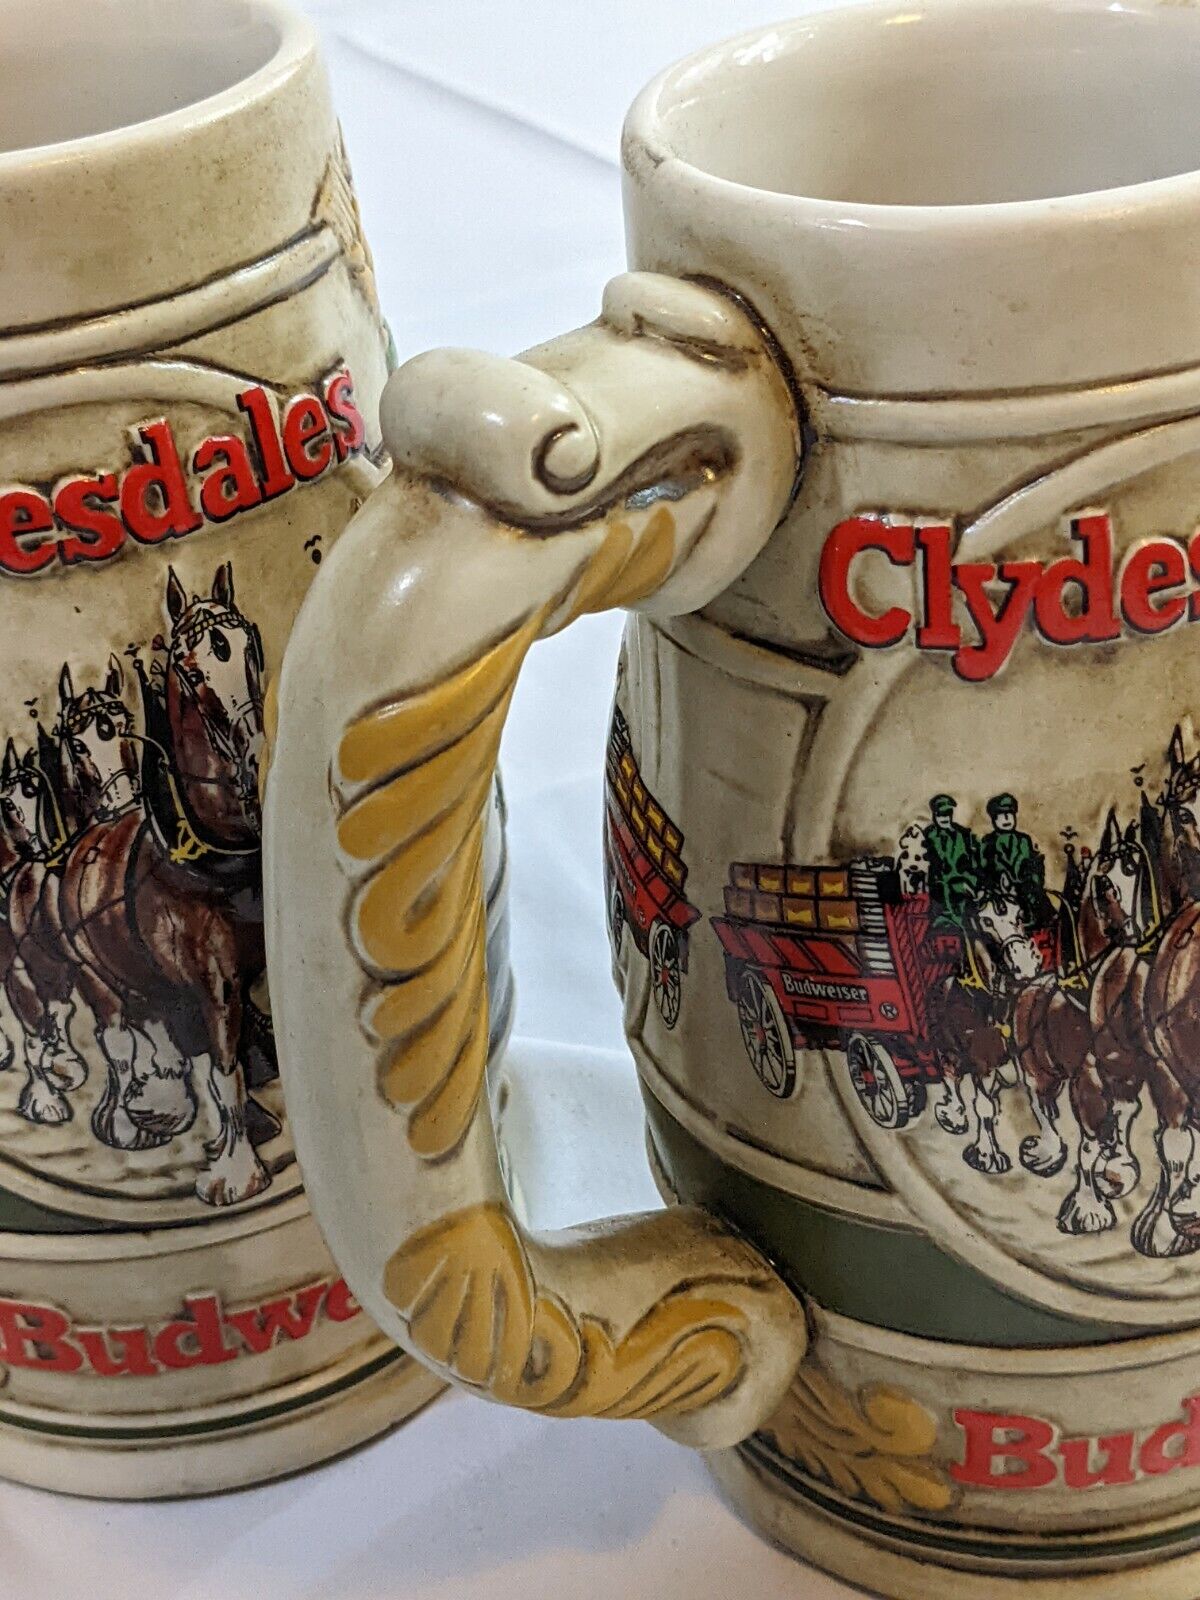 2-Pieces 1983 Authentic Budweiser Holiday Stein Collectors Beer Mug Clydesdales